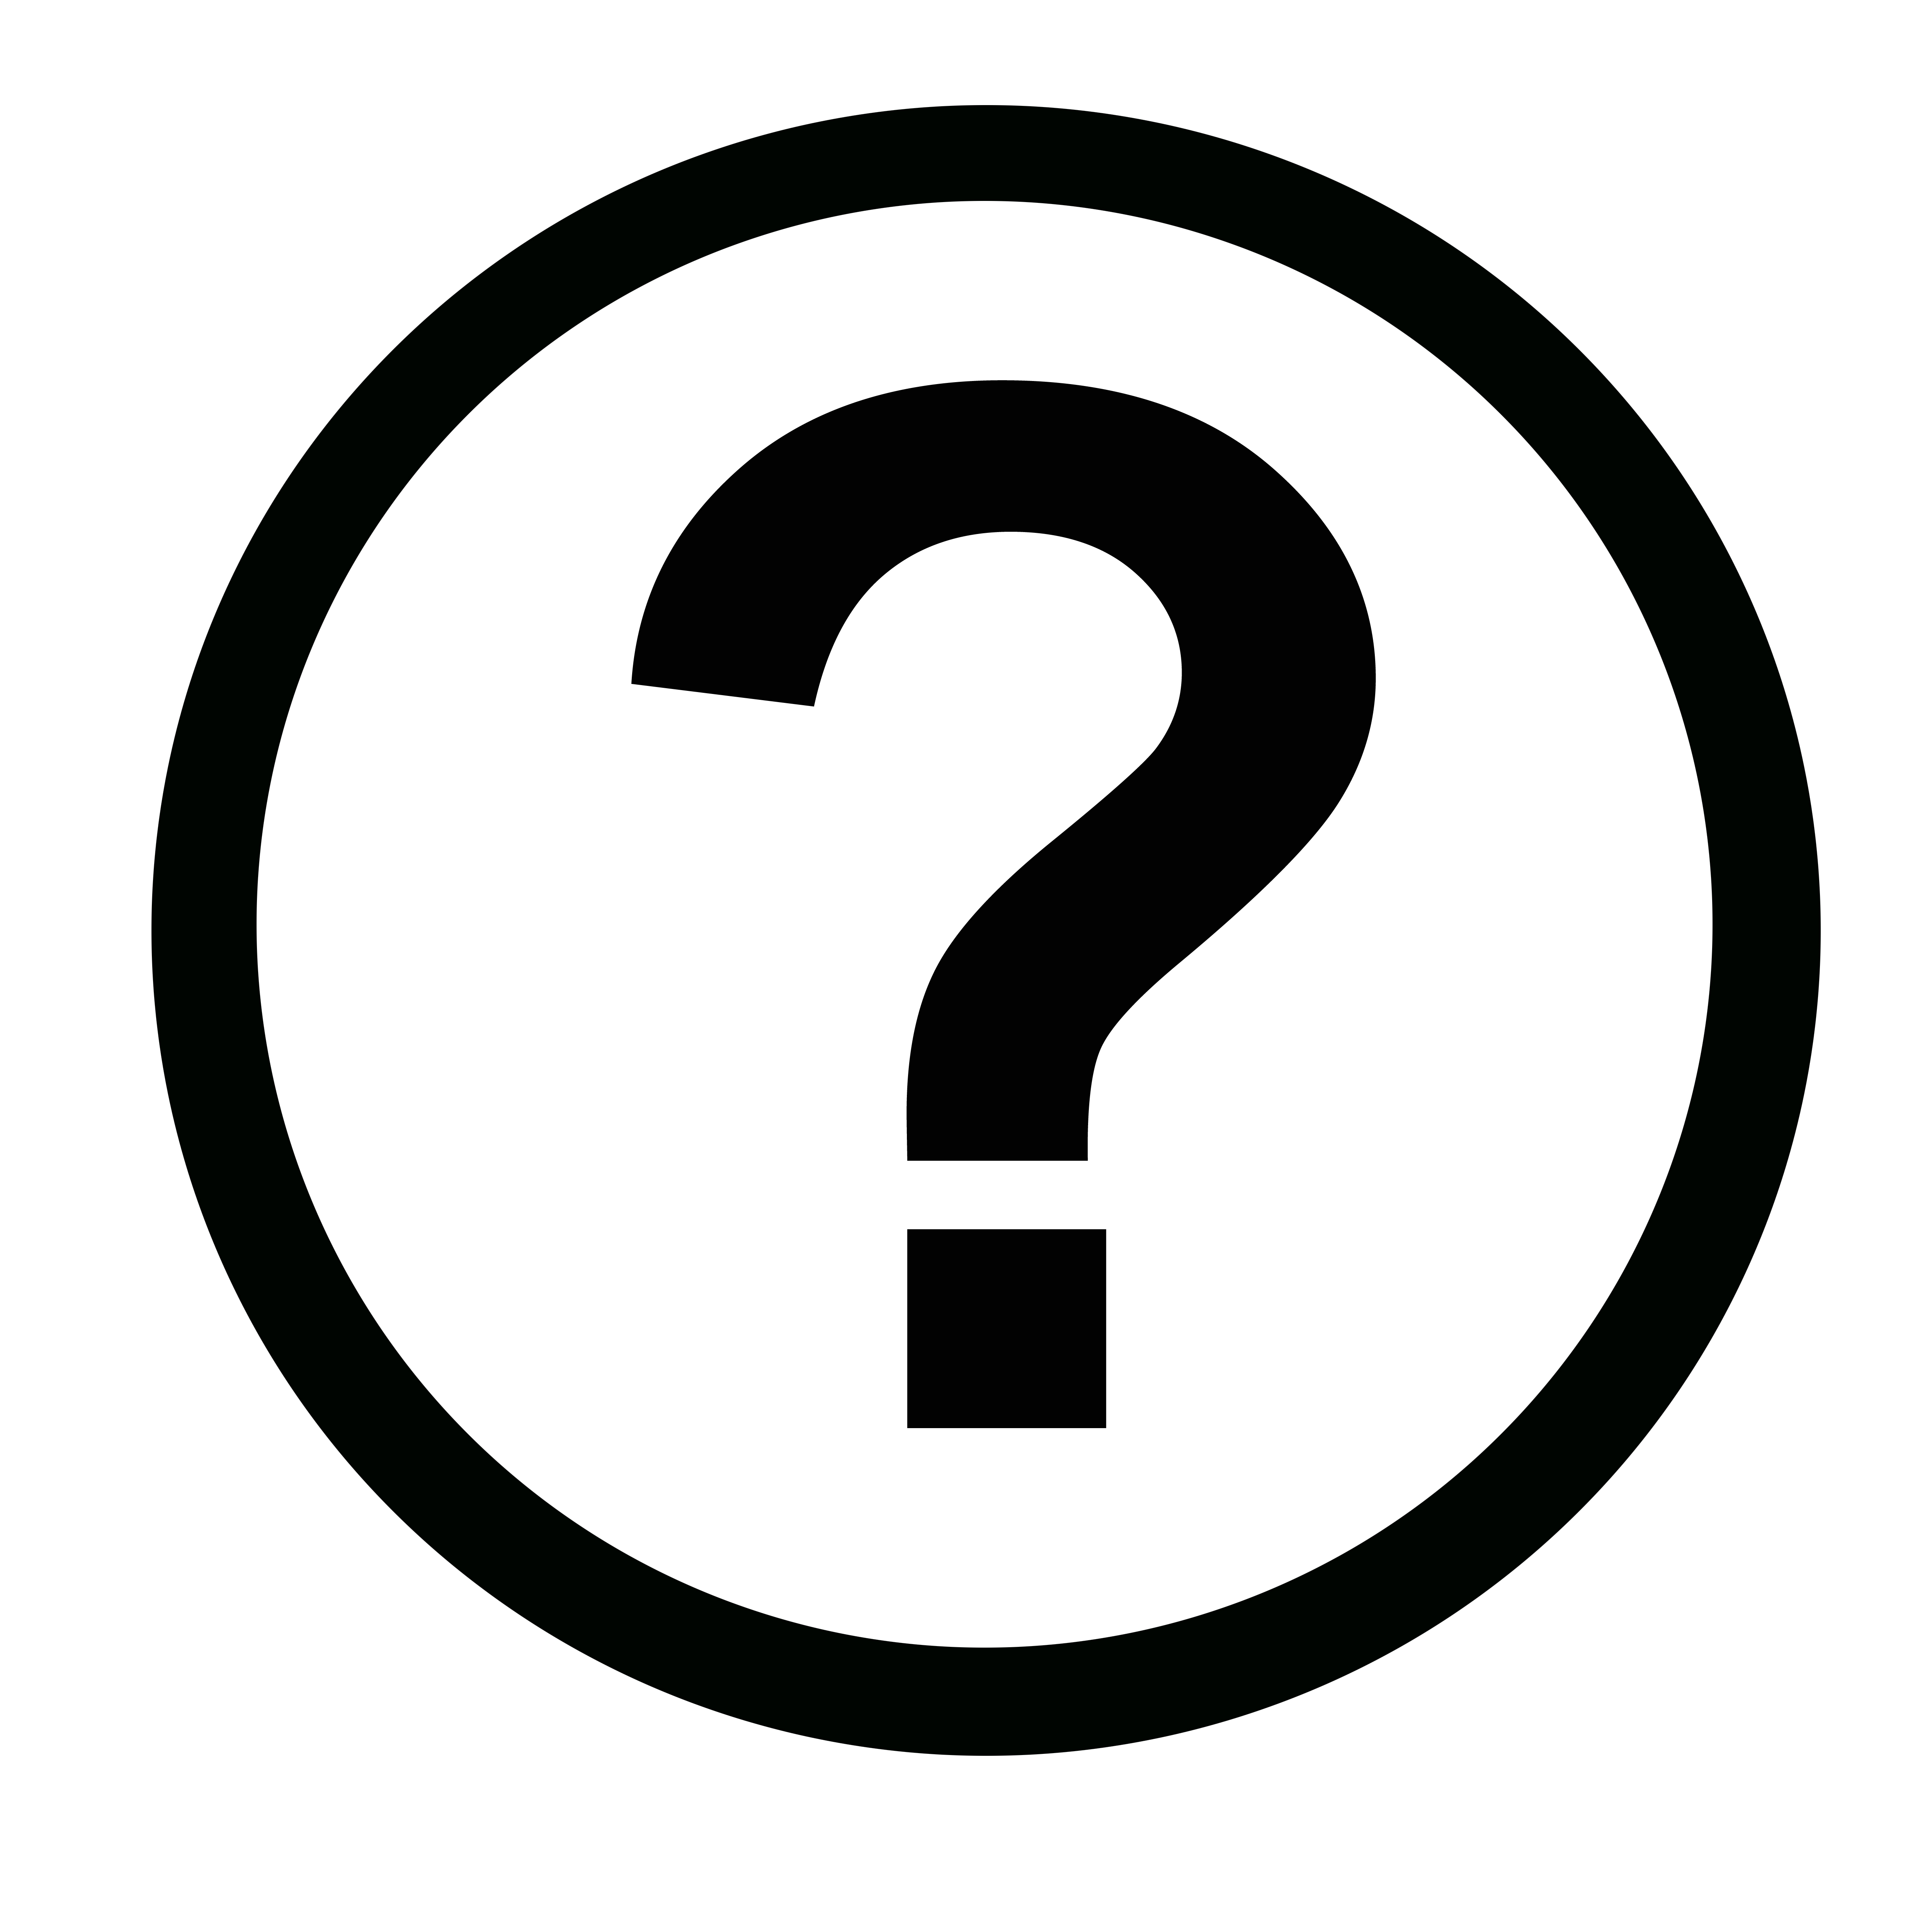 Free Images Of Question Marks - ClipArt Best